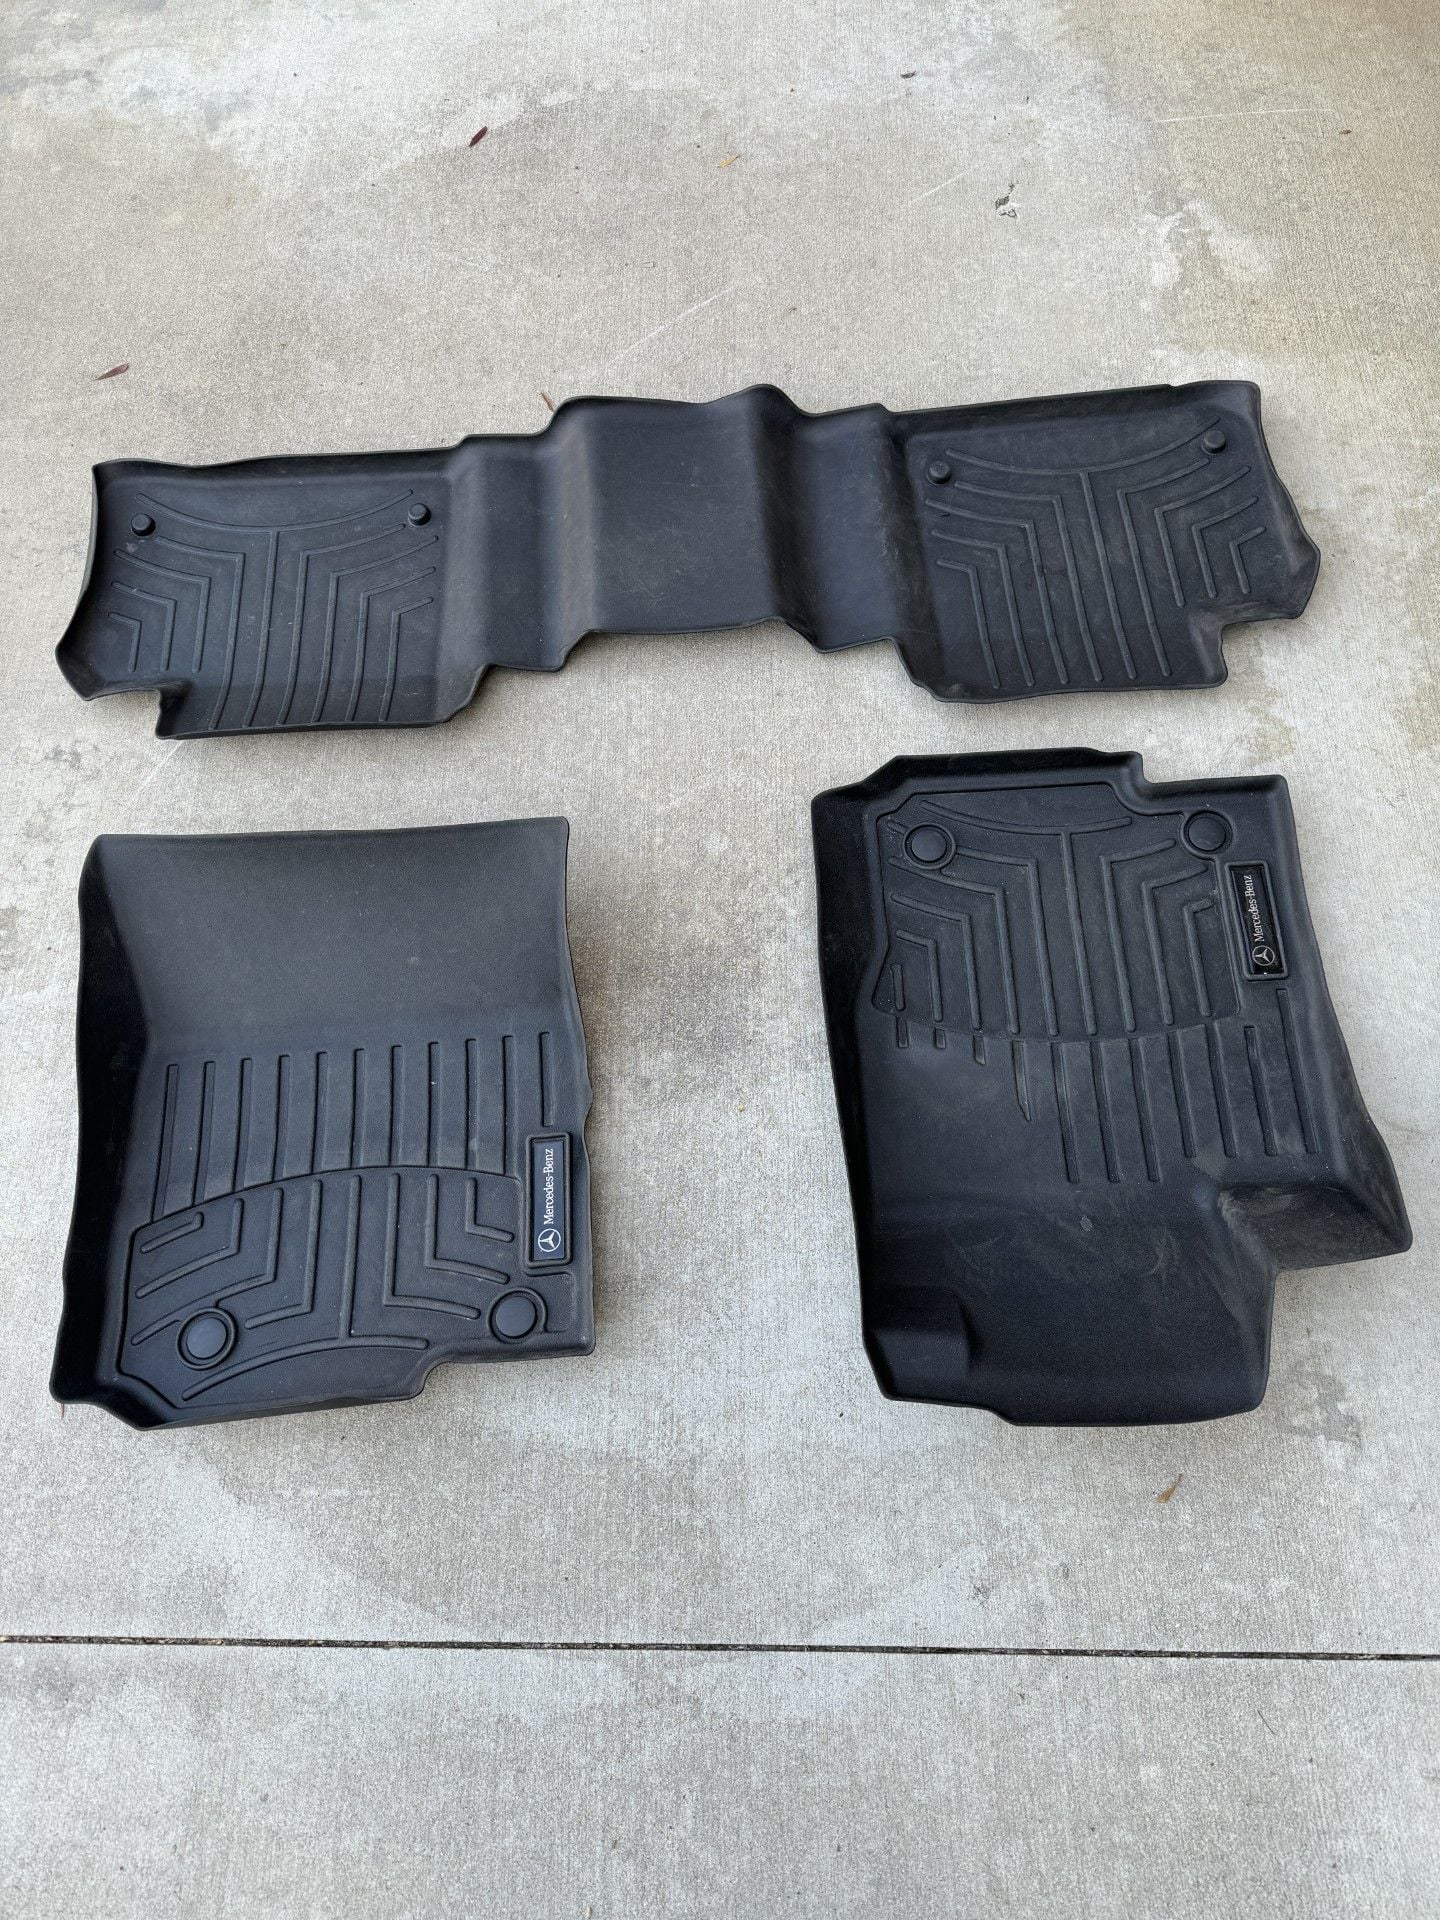 Interior/Upholstery - Heavy Duty / All Weather rubber mats for GLS63 ($200+ new) - Used - Riverside, CA 92508, United States